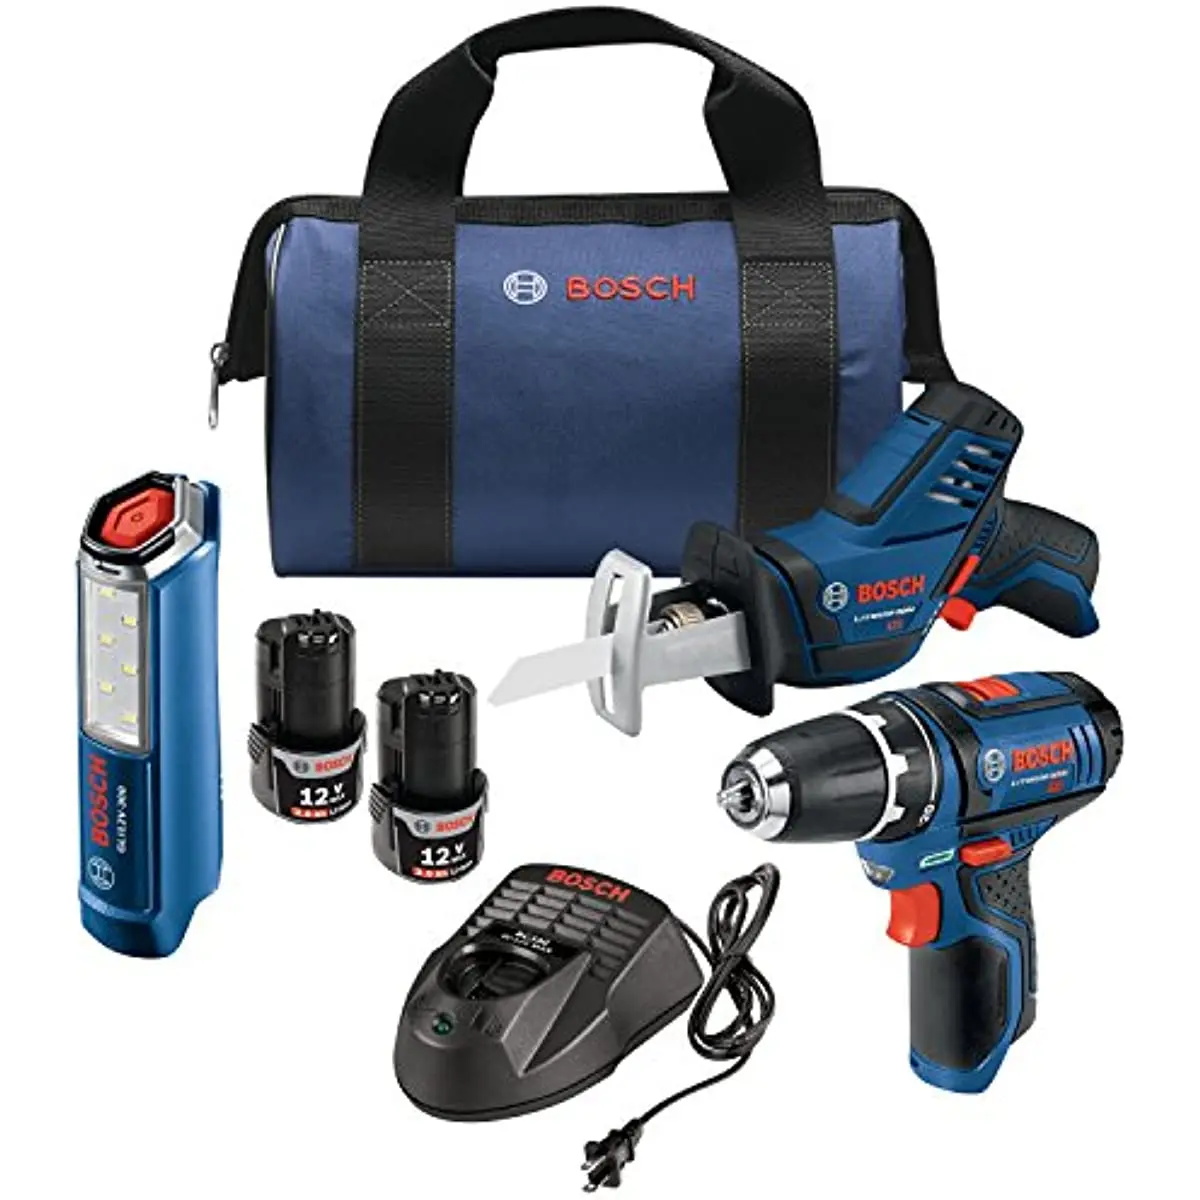 

Power Tools Combo Kit GXL12V-310B22 - 12V Max 3-Tool Set with 3/8 In. Drill/Driver, Pocket Reciprocating Saw and LED Worklight